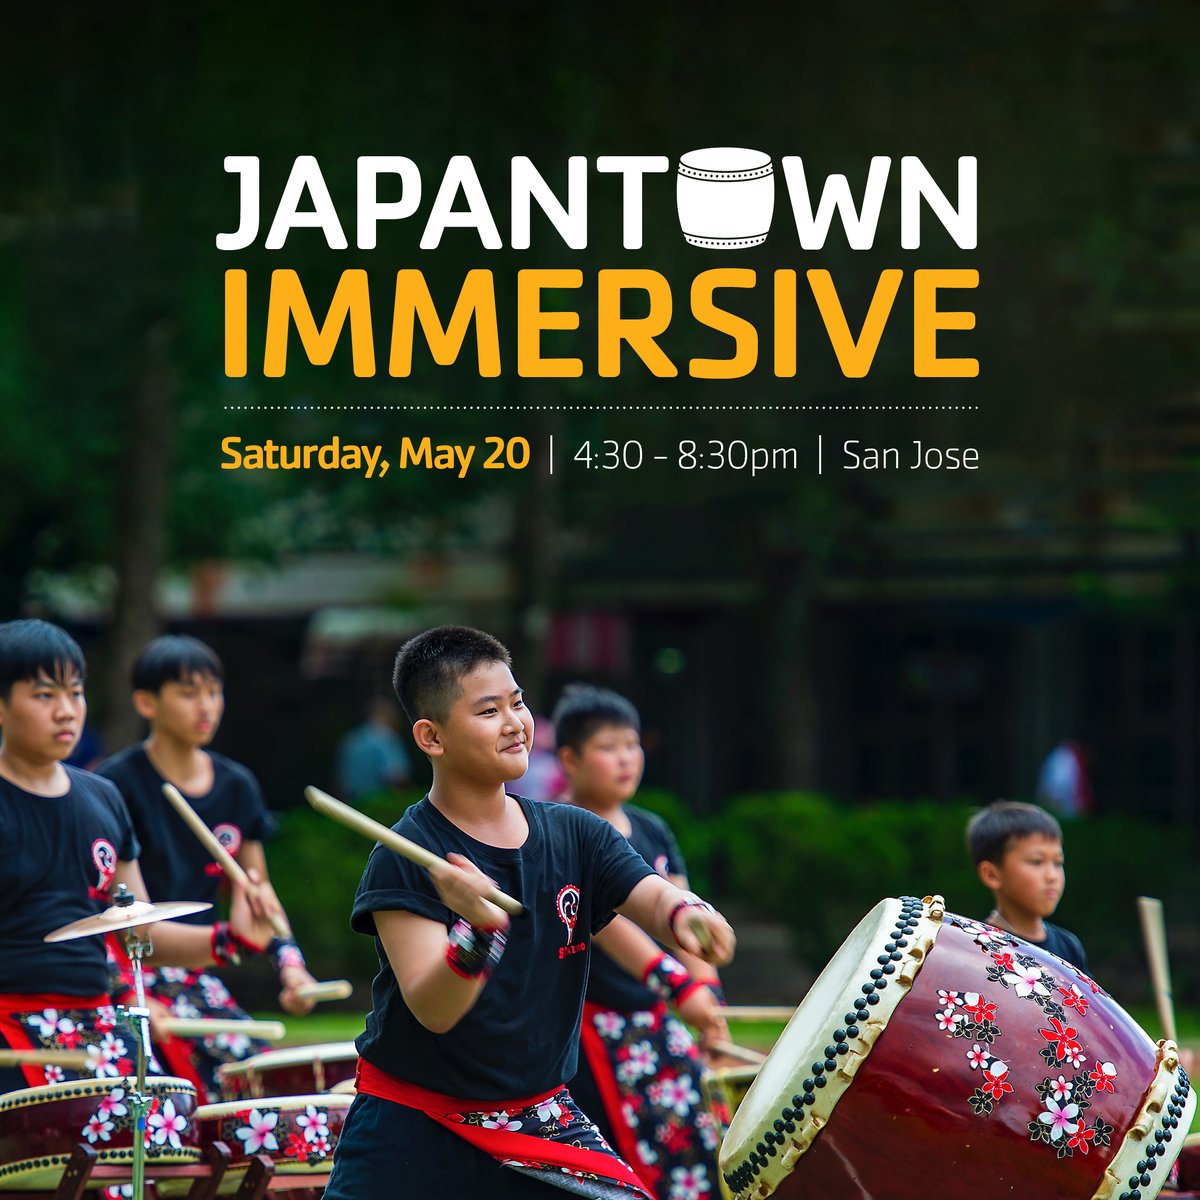 This Saturday, celebrate Asian American/Pacific Islander Heritage Month at San Jose's Japantown Immersive with activities including performances from San Jose Taiko, arts and crafts, scavenger hunts and more. Learn more at taiko.org/japantownimmer….